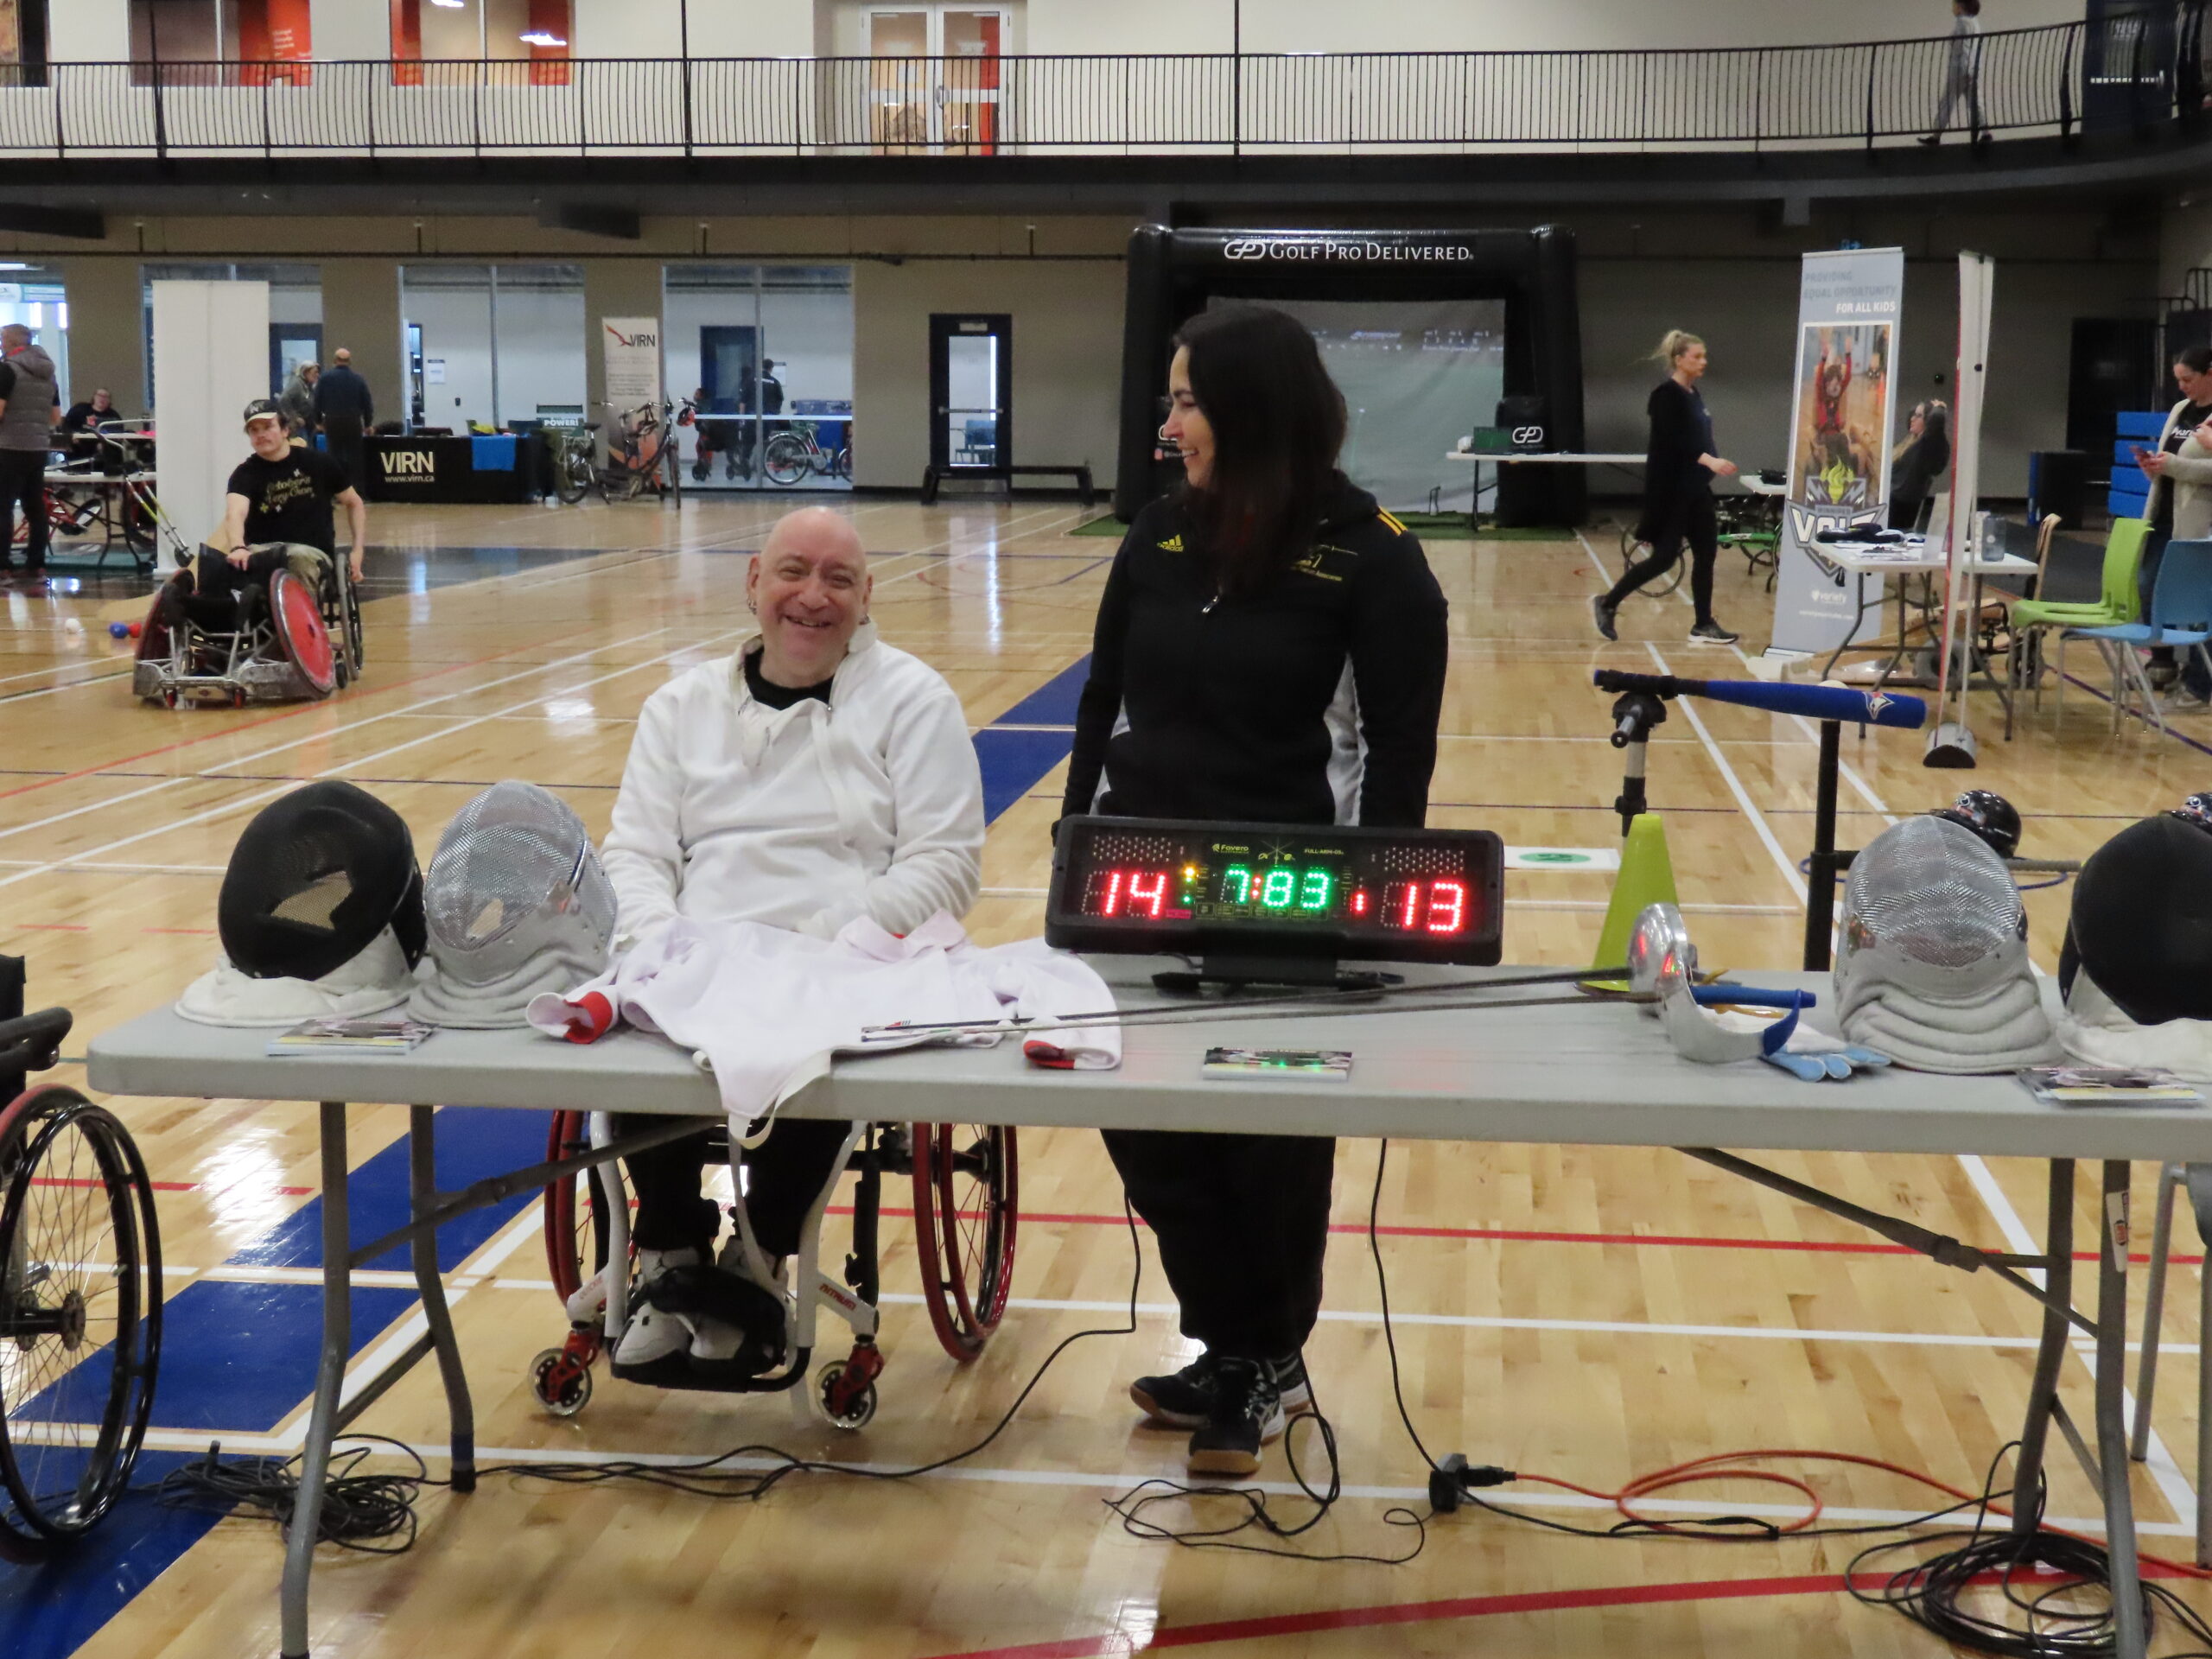 Fencing Manitoba demonstrated wheelchair fencing at the expo!